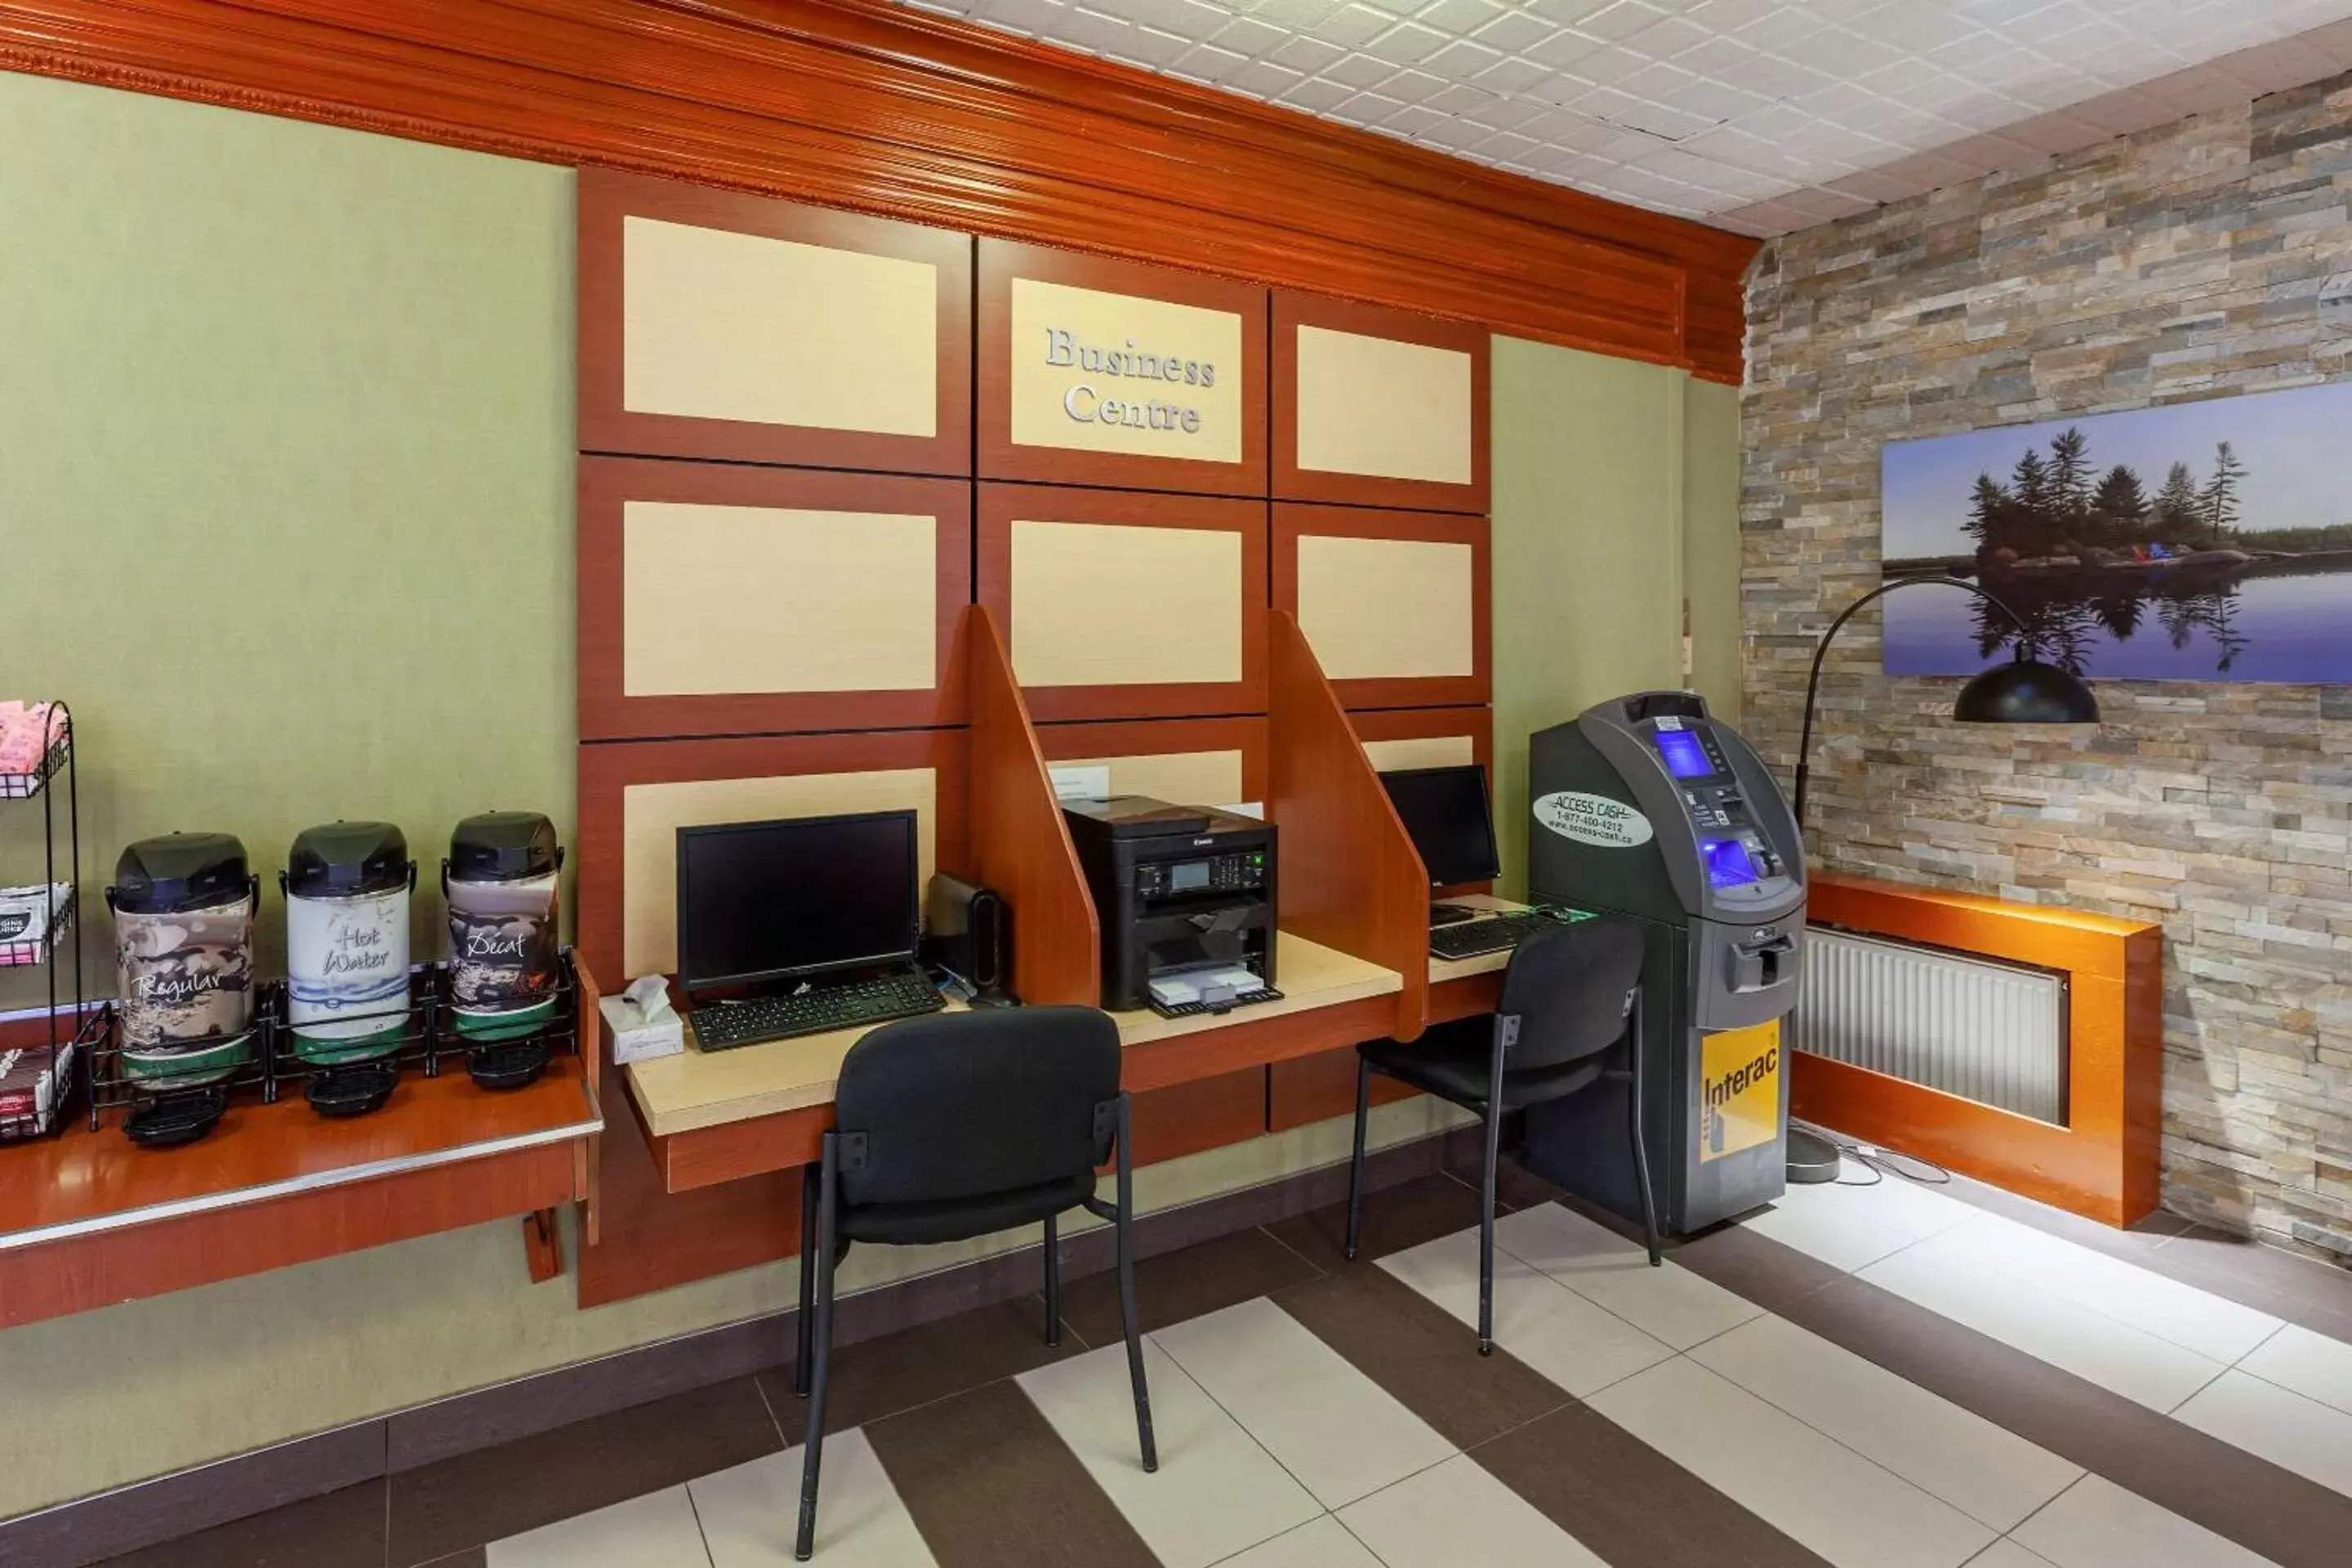 Business facilities in Quality Inn Toronto Airport